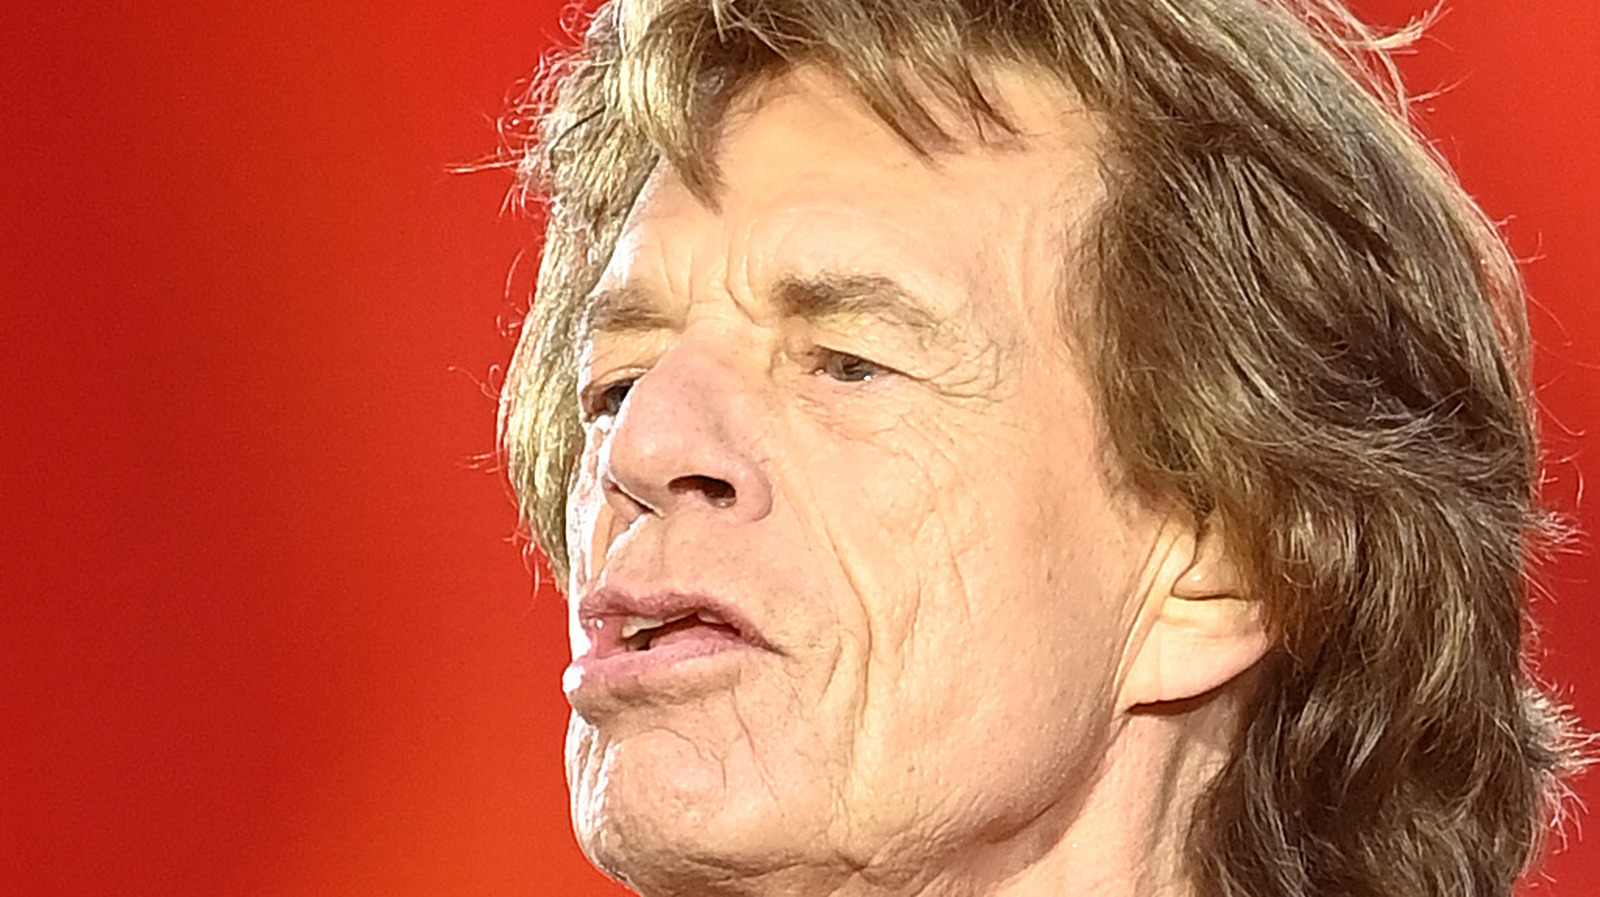 Mick Jagger S Unexpected Response To His Time In Jail